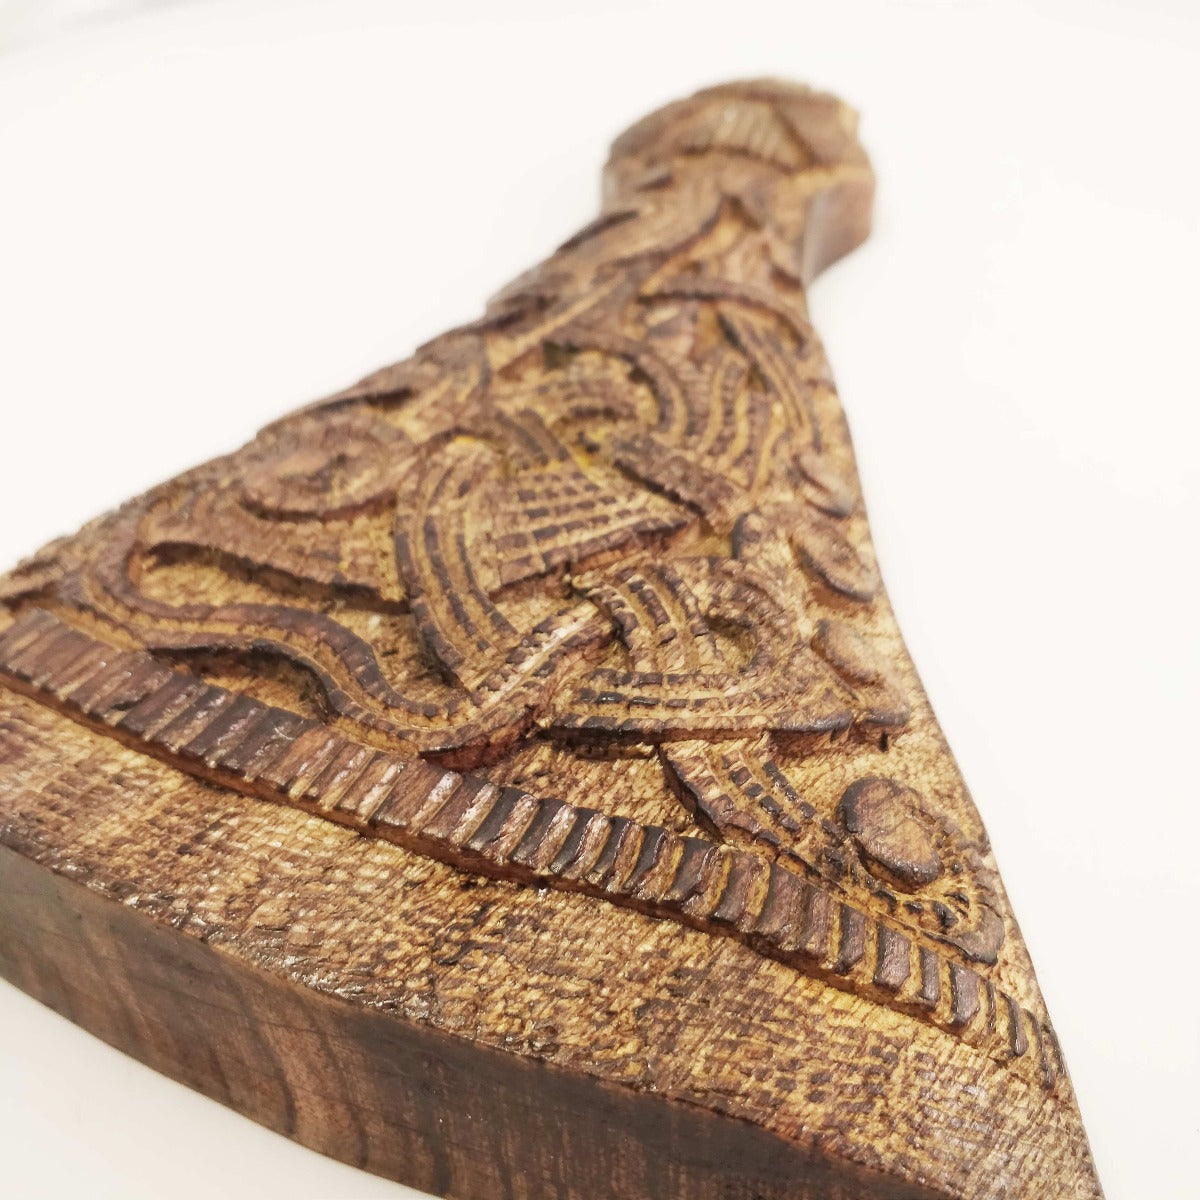 Mammen decor axe wall hanging norse viking wood carved